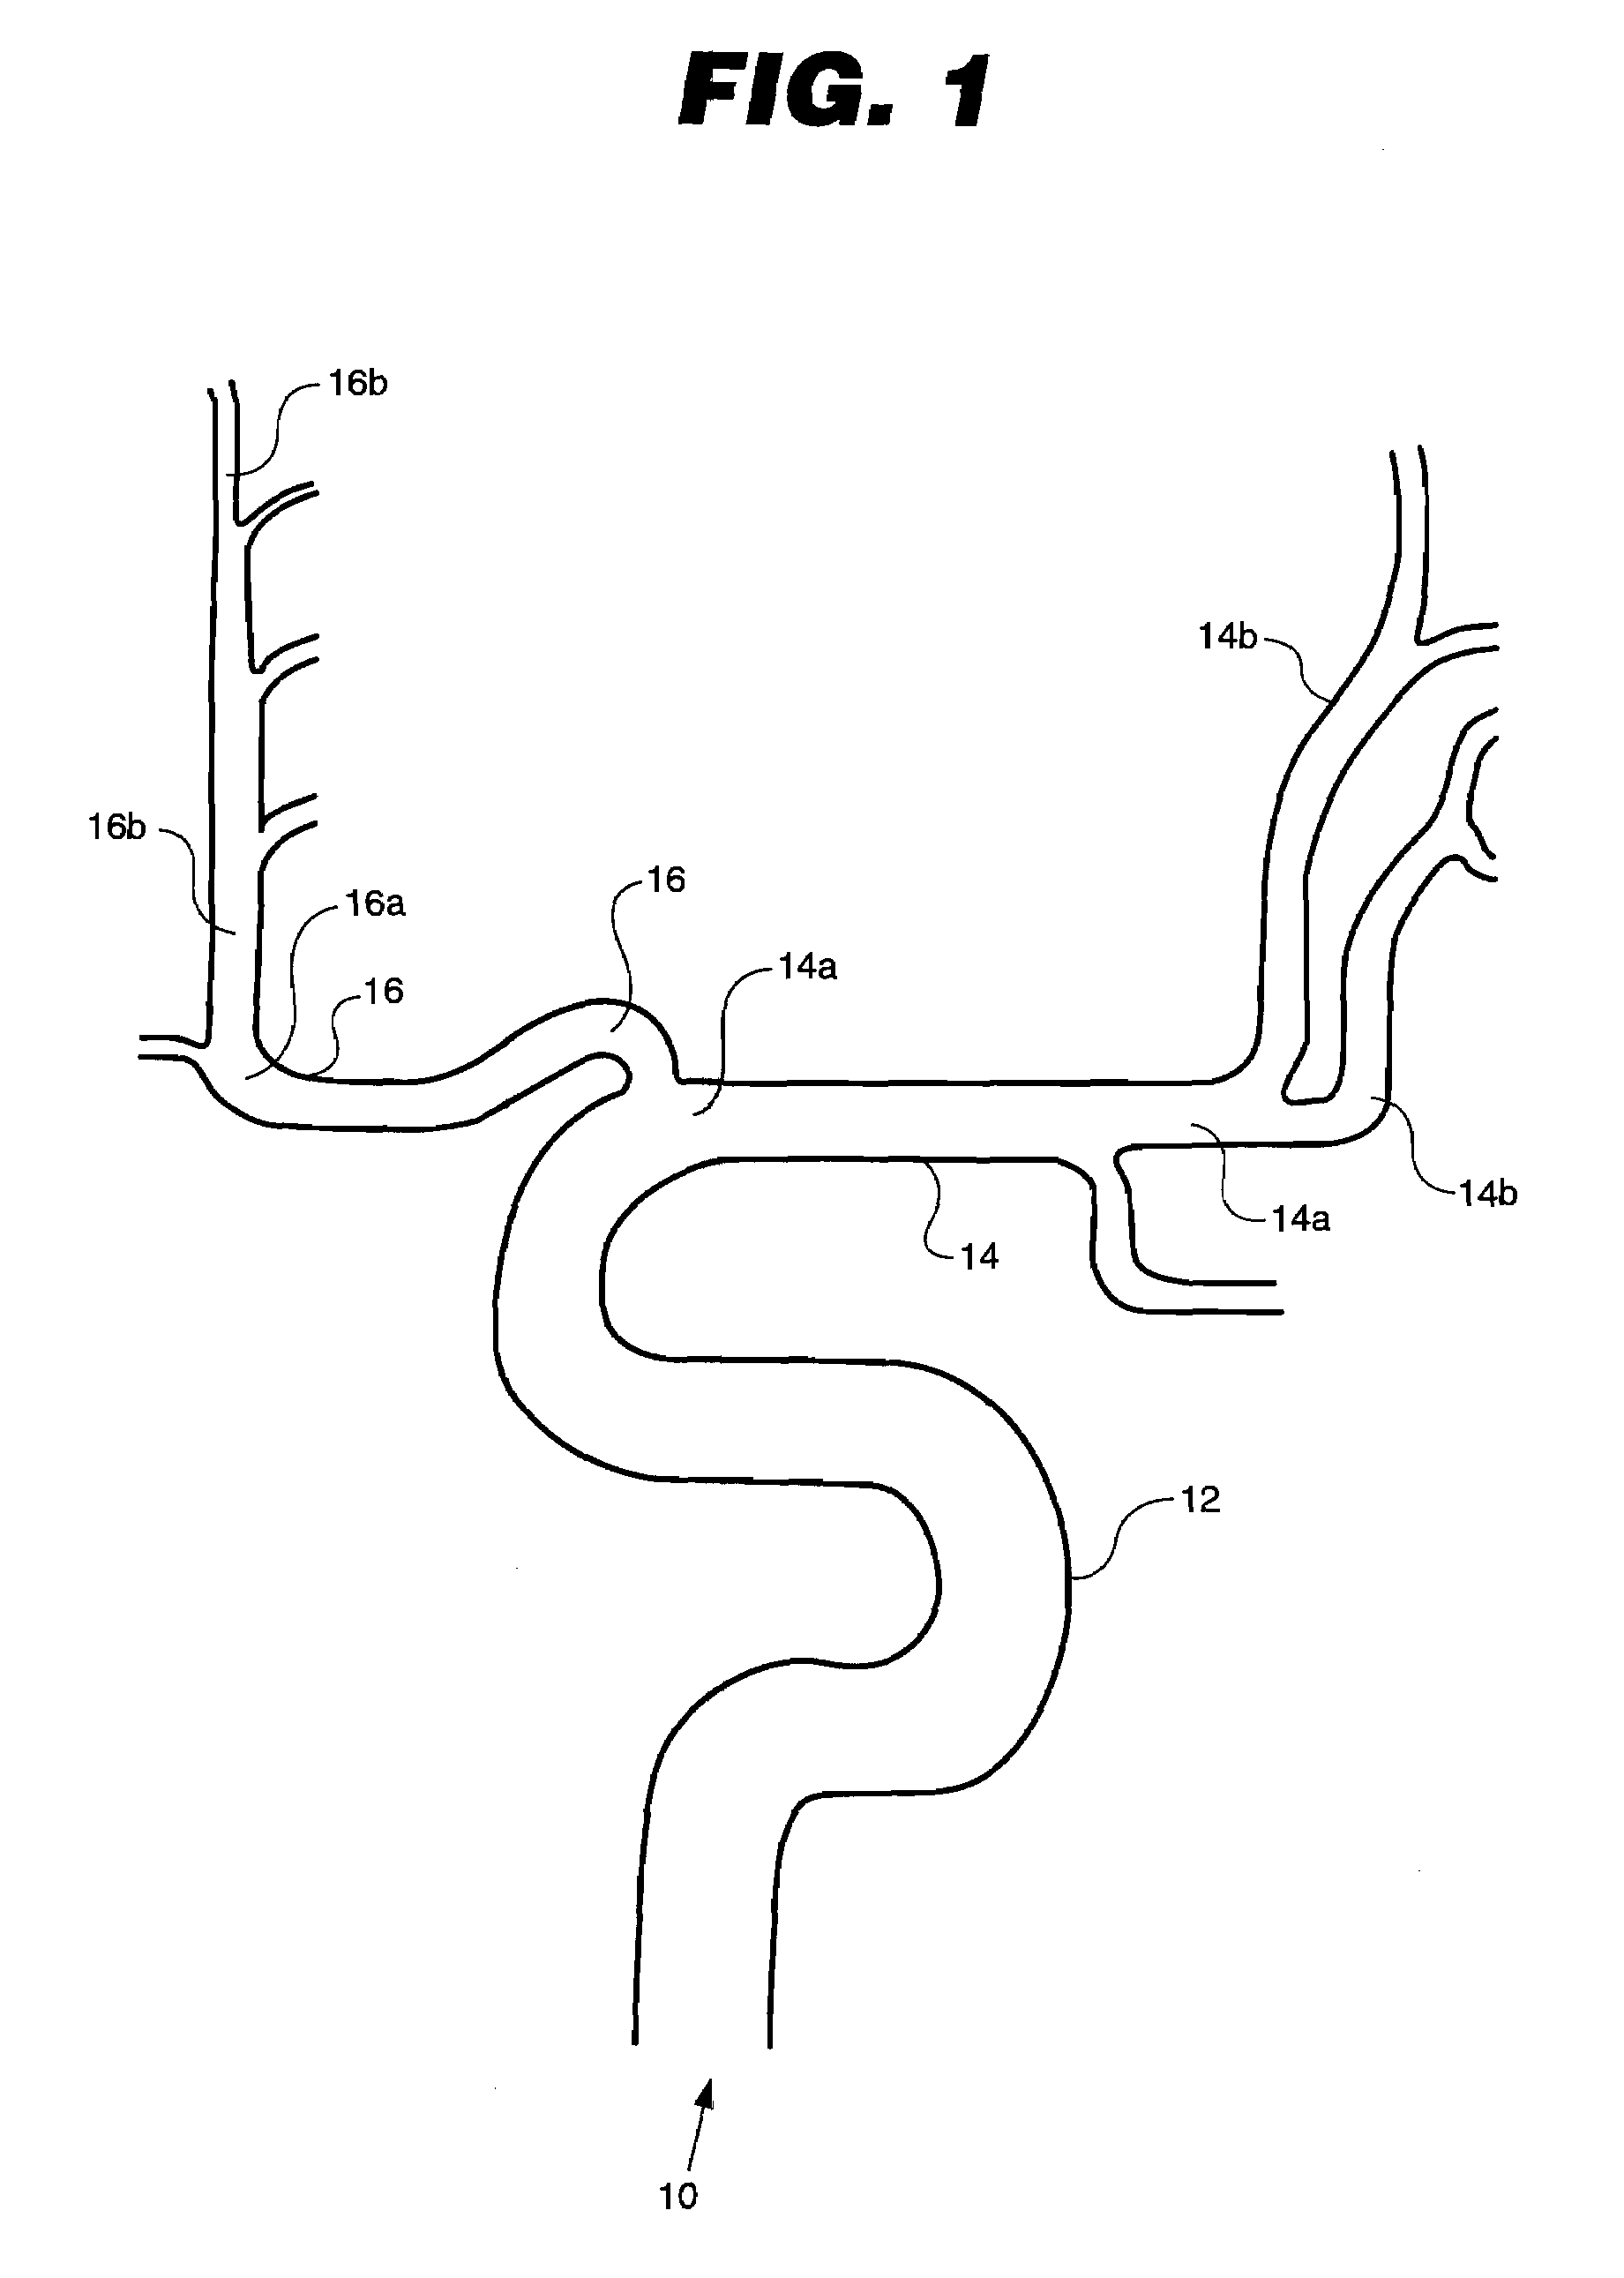 Apparatus and methods for dilating vasospasm of small intracranial arteries